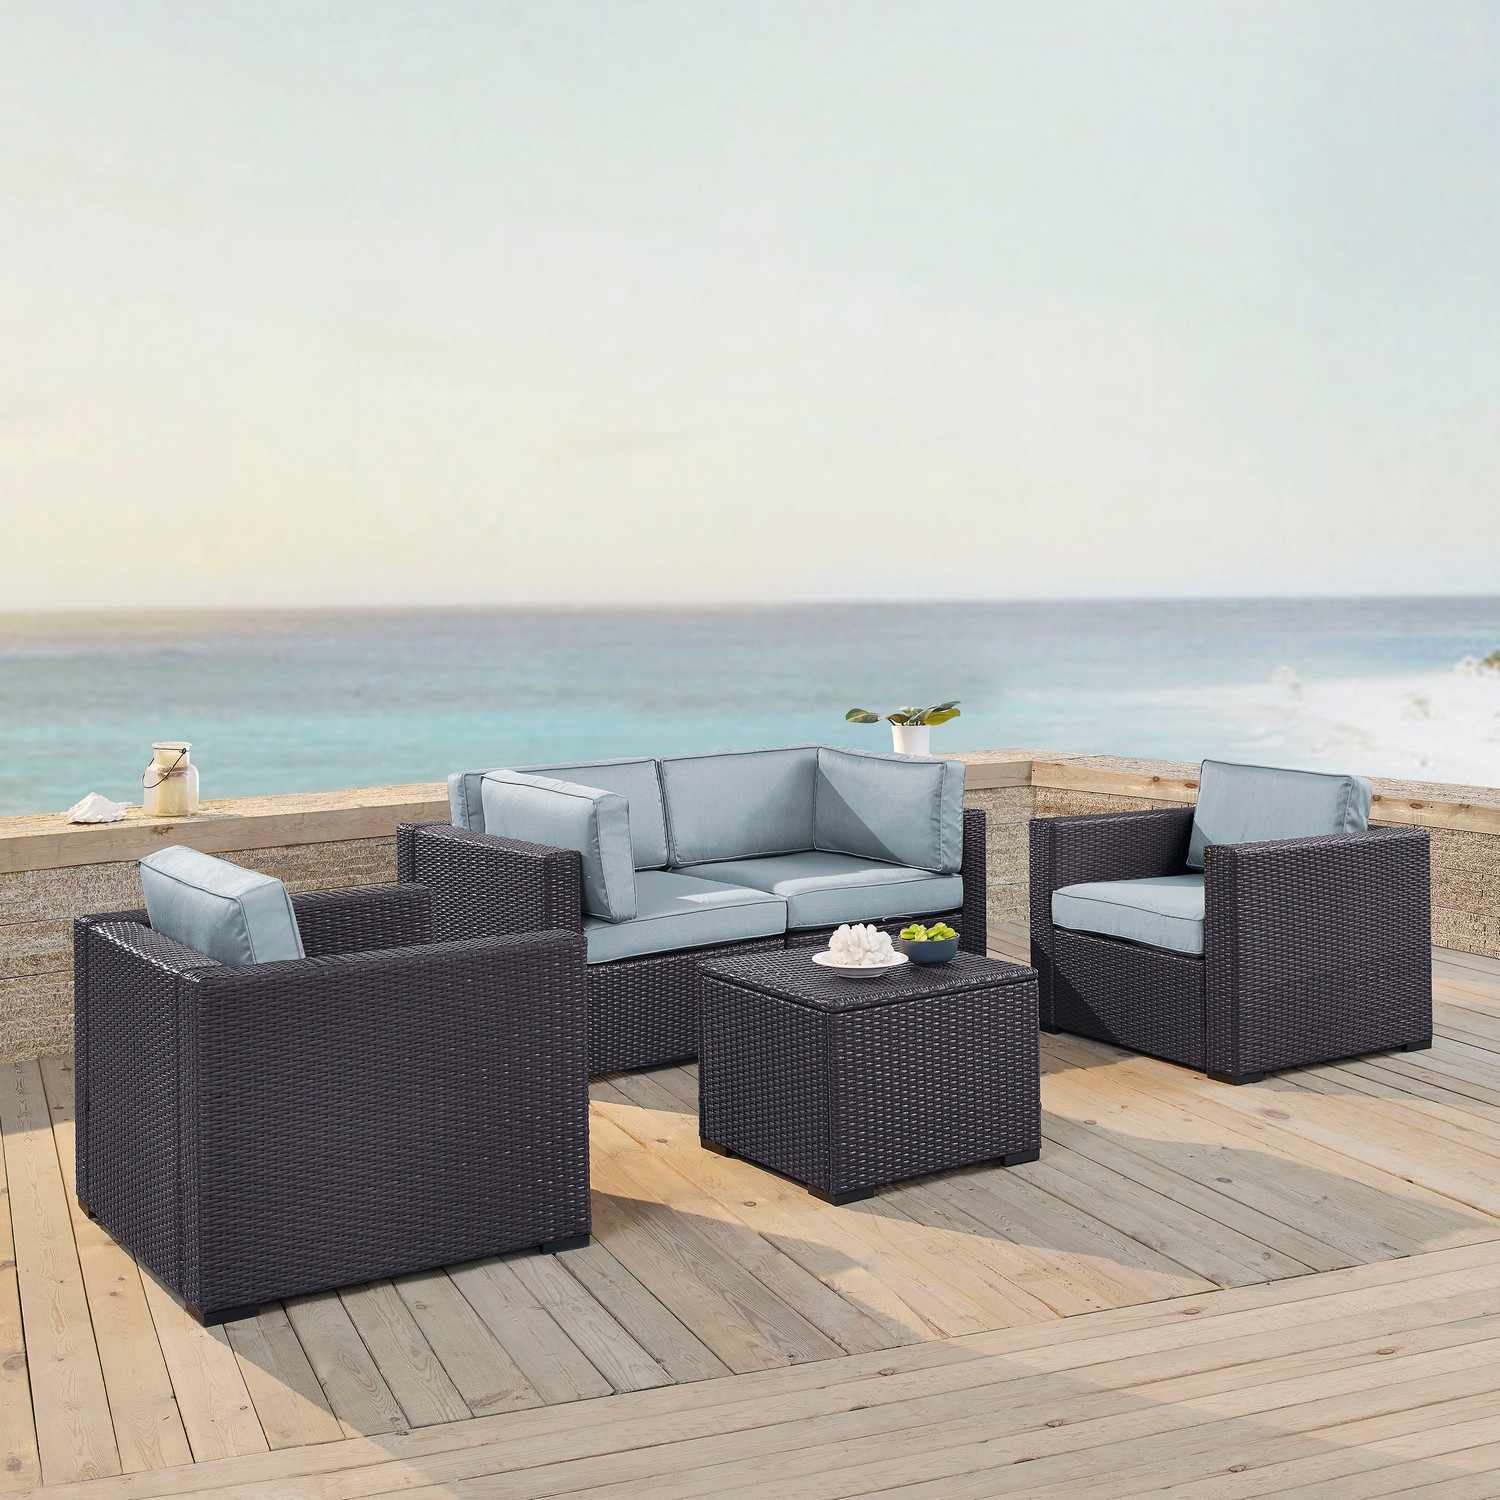 Crosley Biscayne 5-PC Outdoor Wicker Sectional Set - 2 Armchairs, 2 Corner Chair, Coffee Table - Mist/Brown